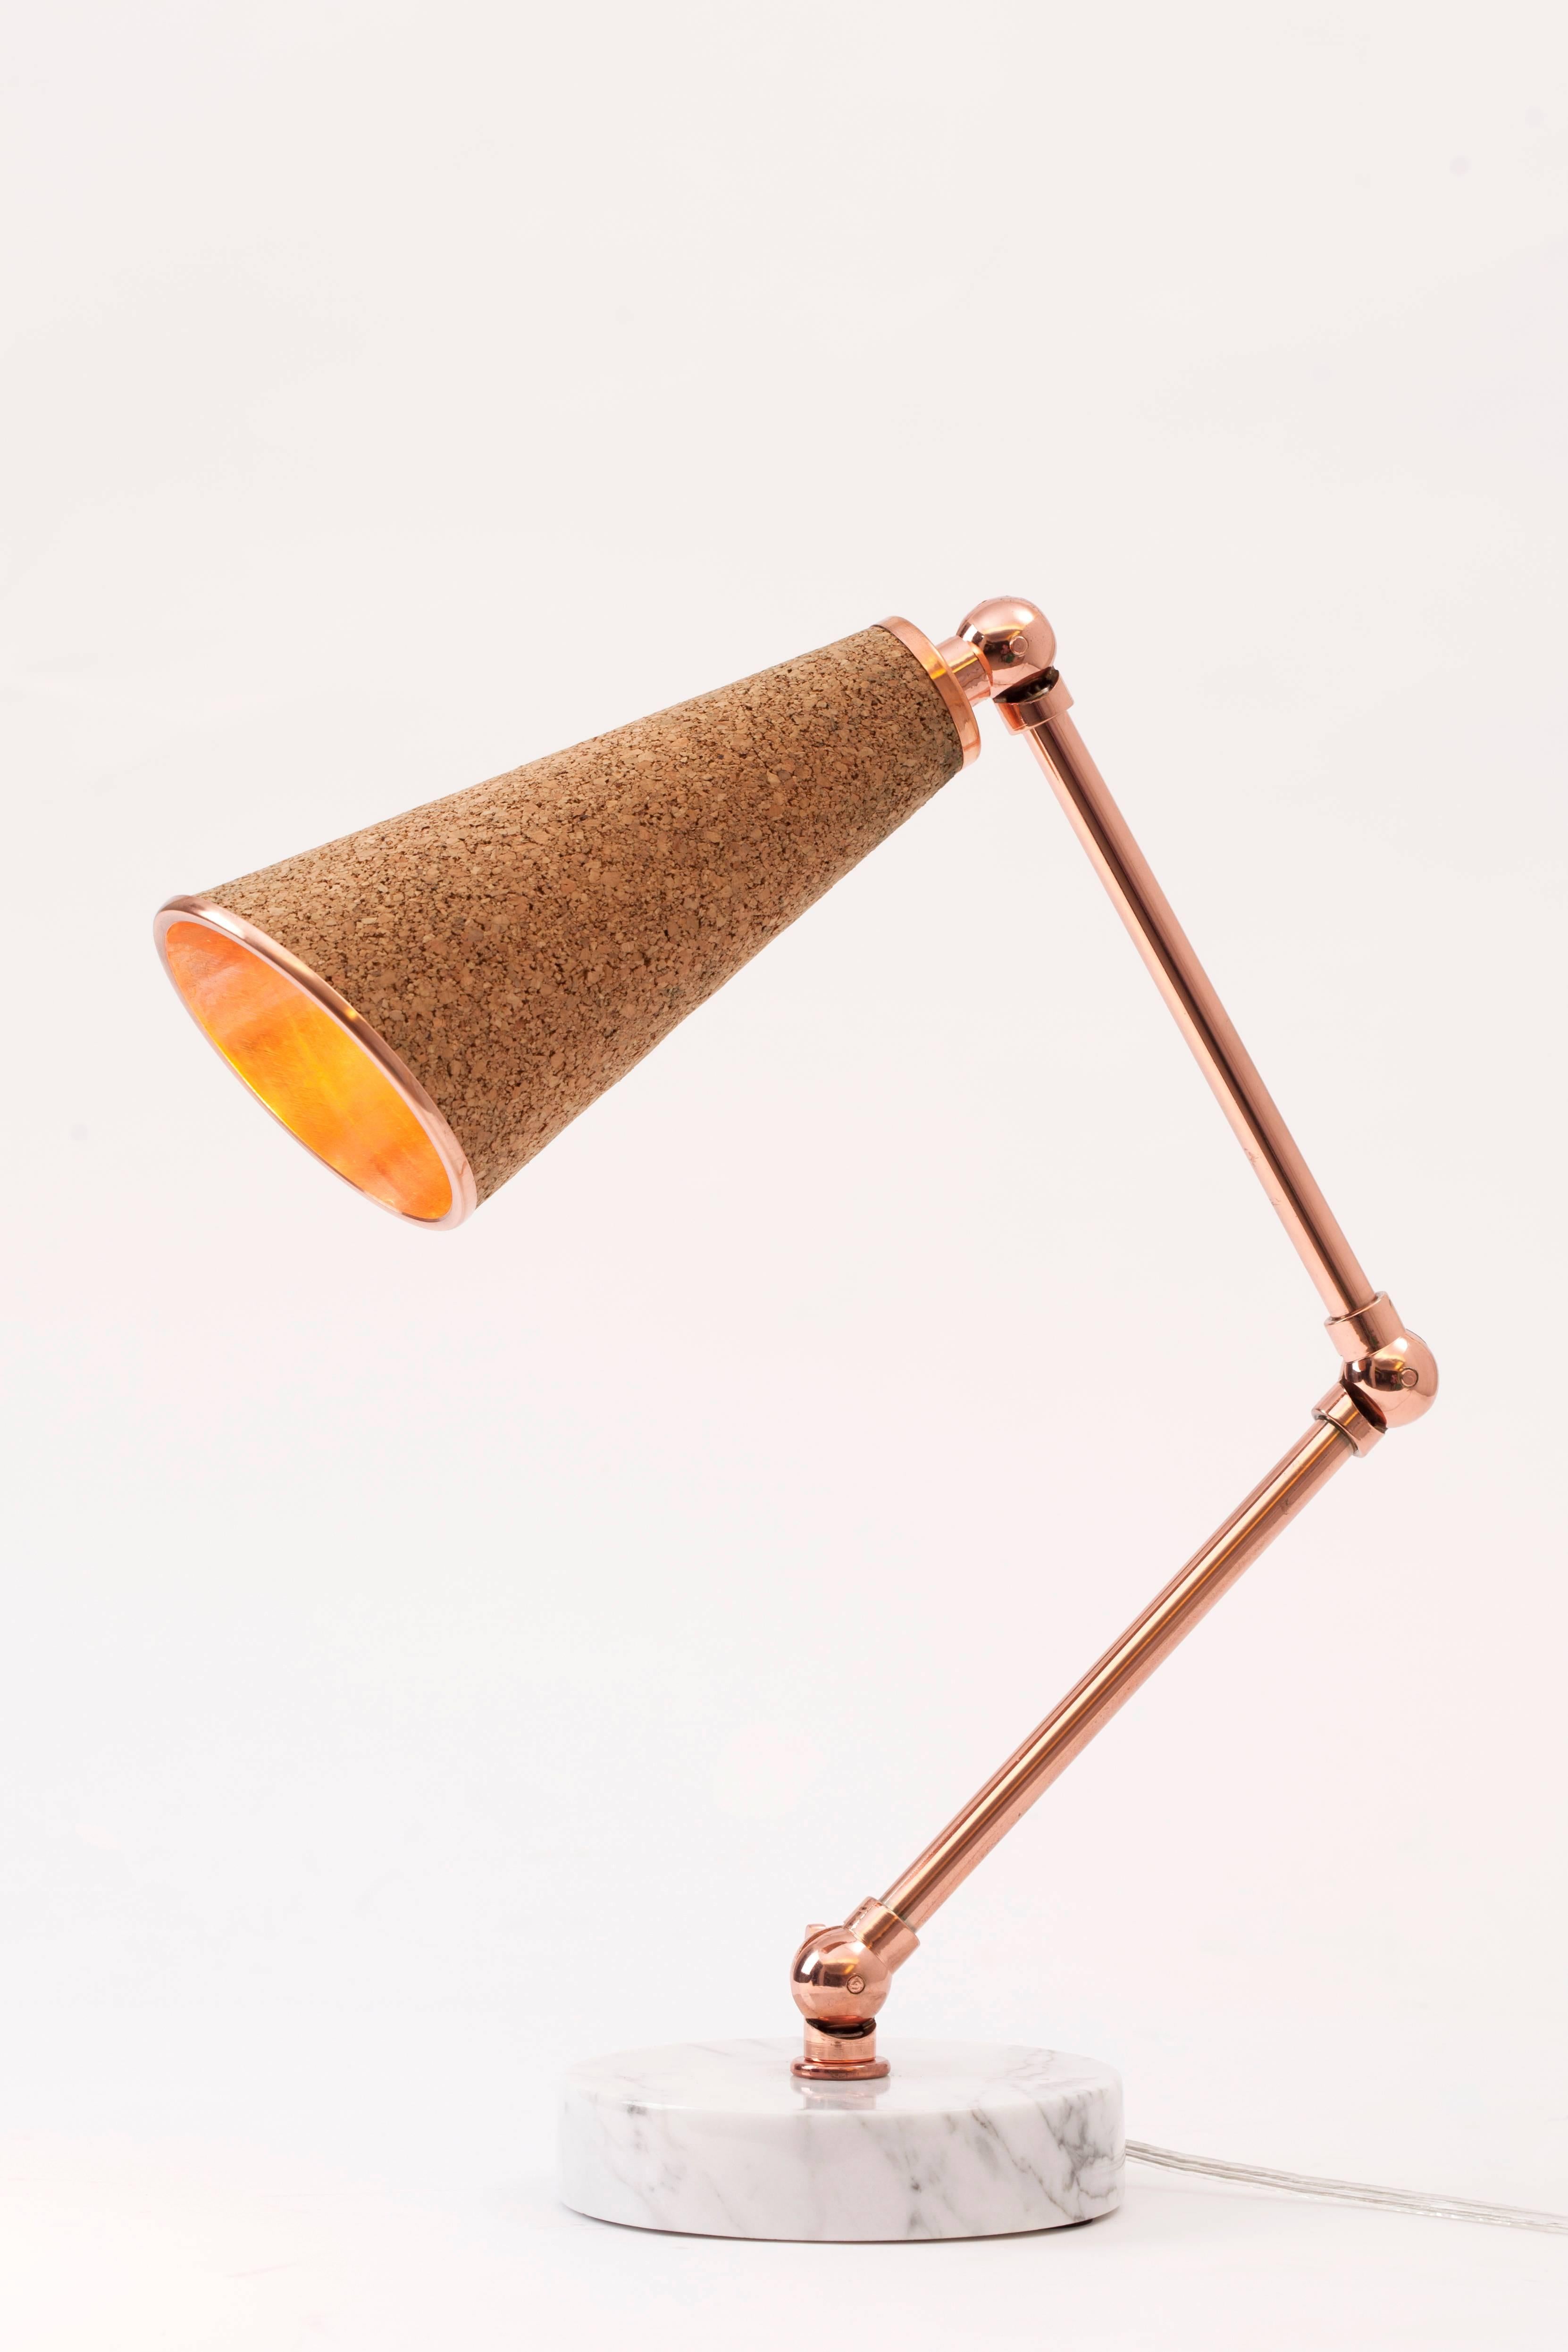 Turkish Lanterna Table Lamp in Carrara Marble, Cork and Copper with Adjustable Arms  For Sale